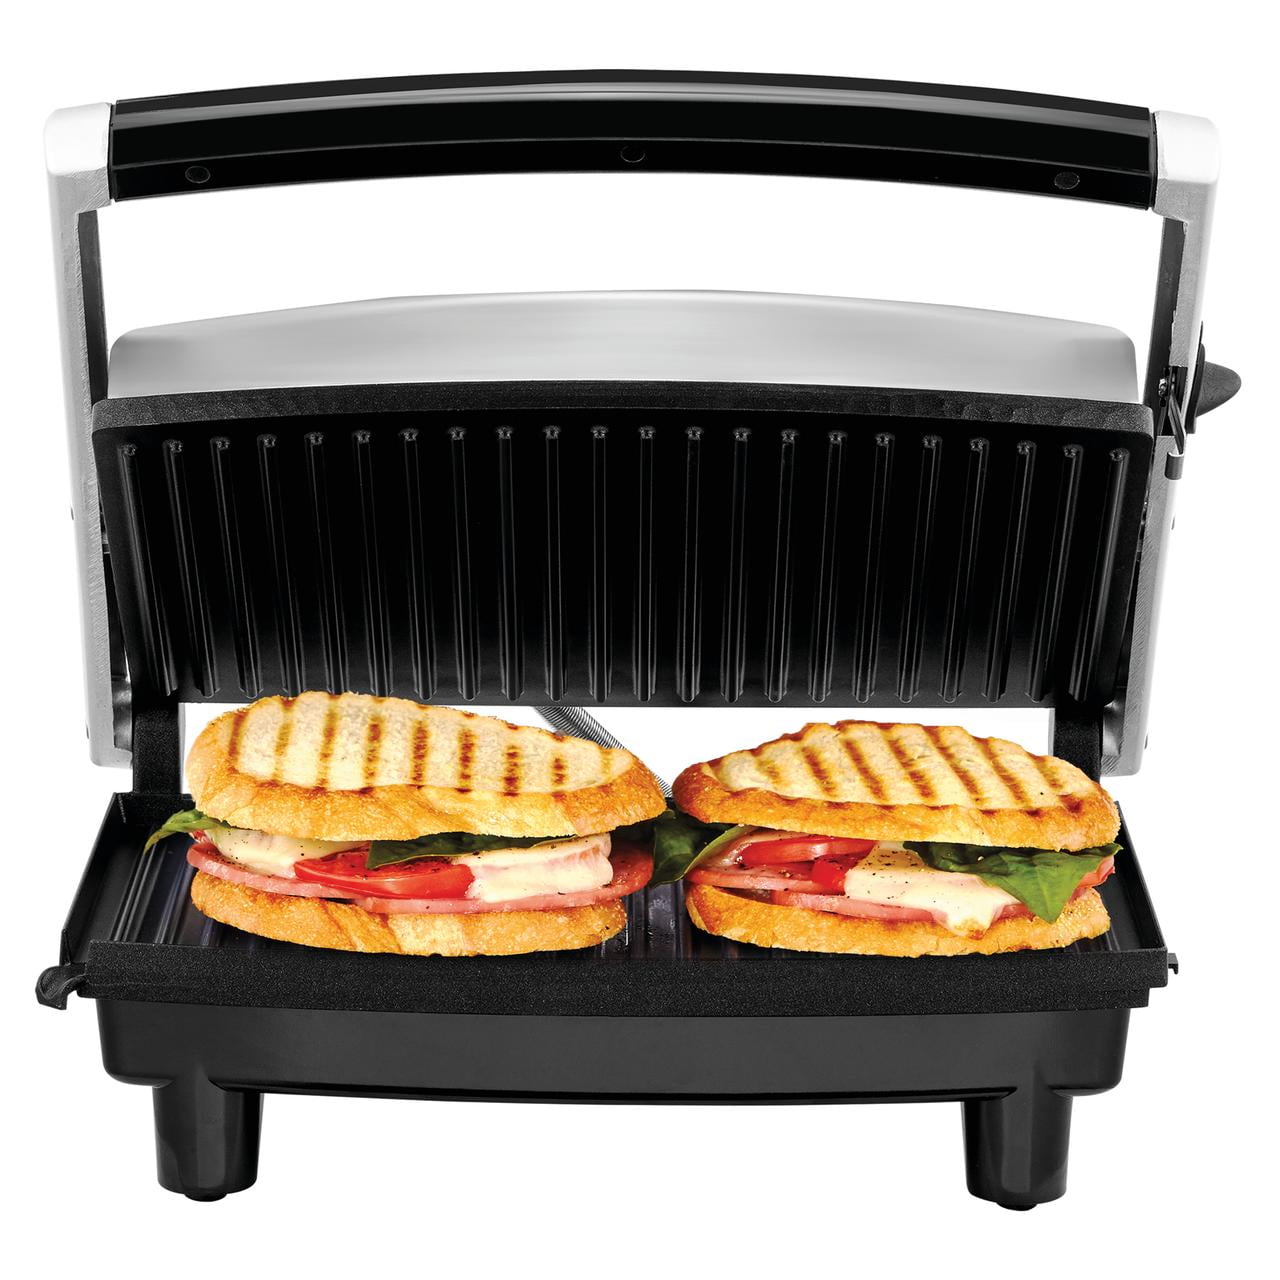 Panini Grill - Definition and Cooking Information 